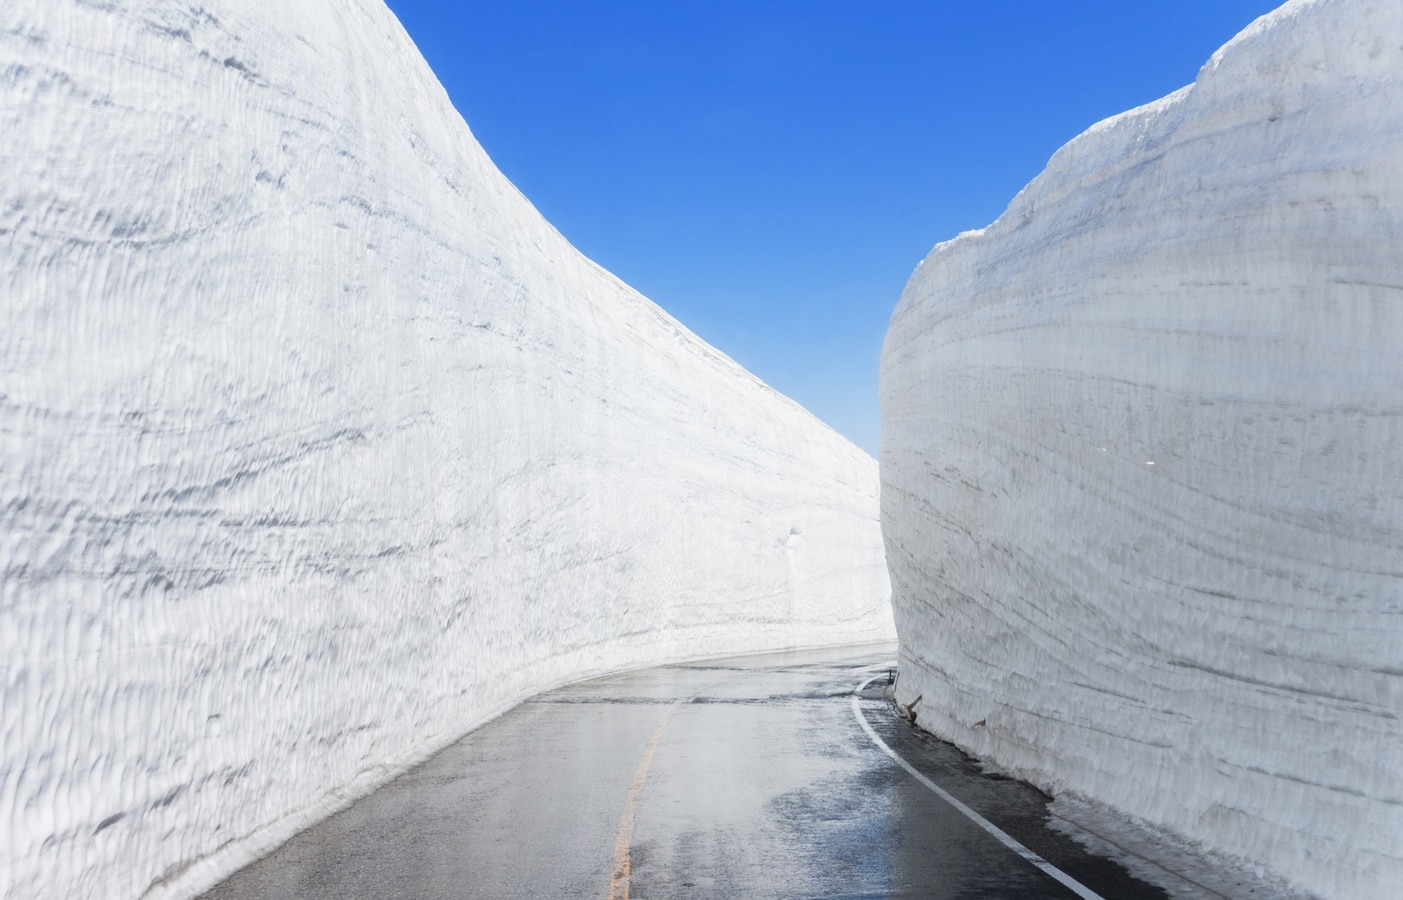 Affordable Travel to Snow Wall YukinoOtani All About Japan